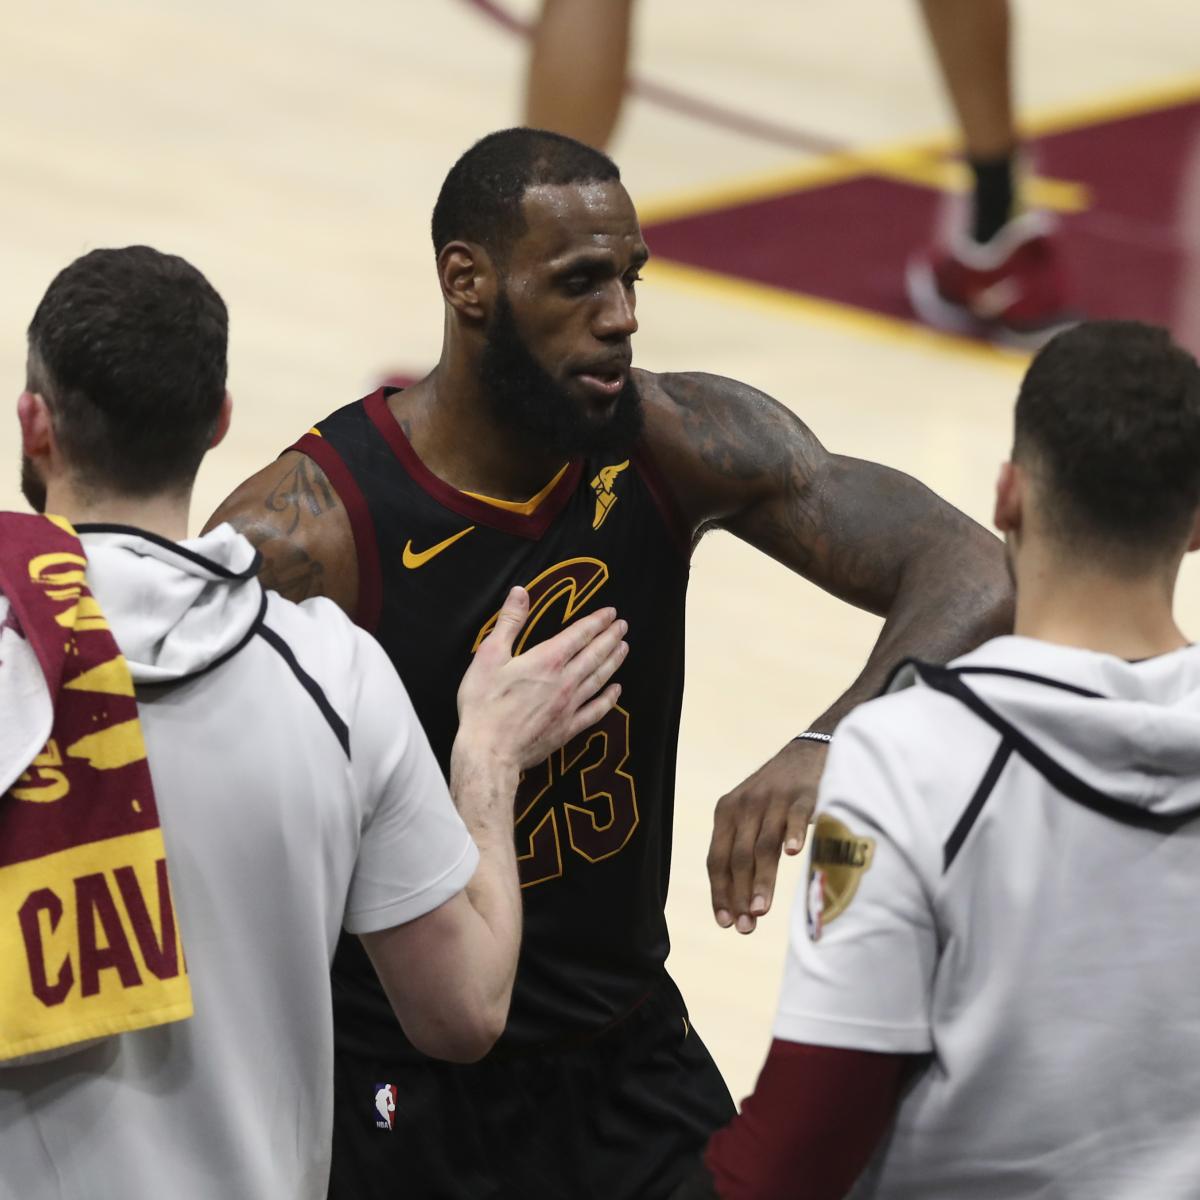 LeBron's Free Agency Will Come, But for Now, Cavs Reflect on 'Whirlwind